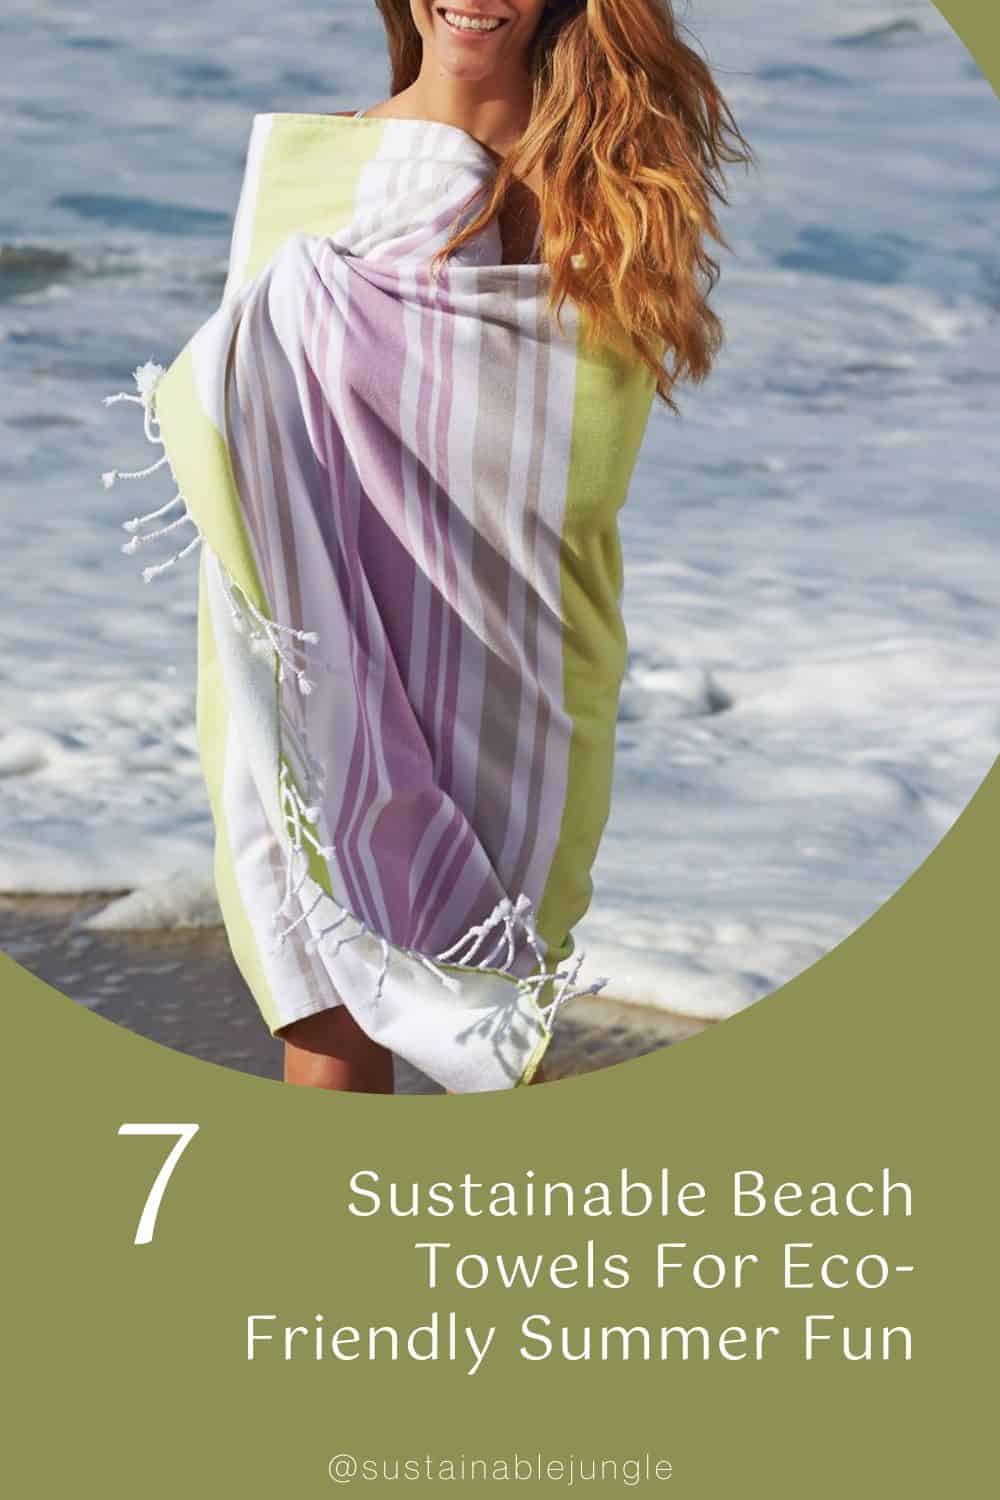 7 Sustainable Beach Towels For Eco-Friendly Summer Fun Image by Coyuchi #sustainablebeachtowels #sustainableethicalbeachtowels #ecofriendlybeachtowels #sustainableorganicbeachtowels #cutesustainablebeachtowels #sustainablejungle